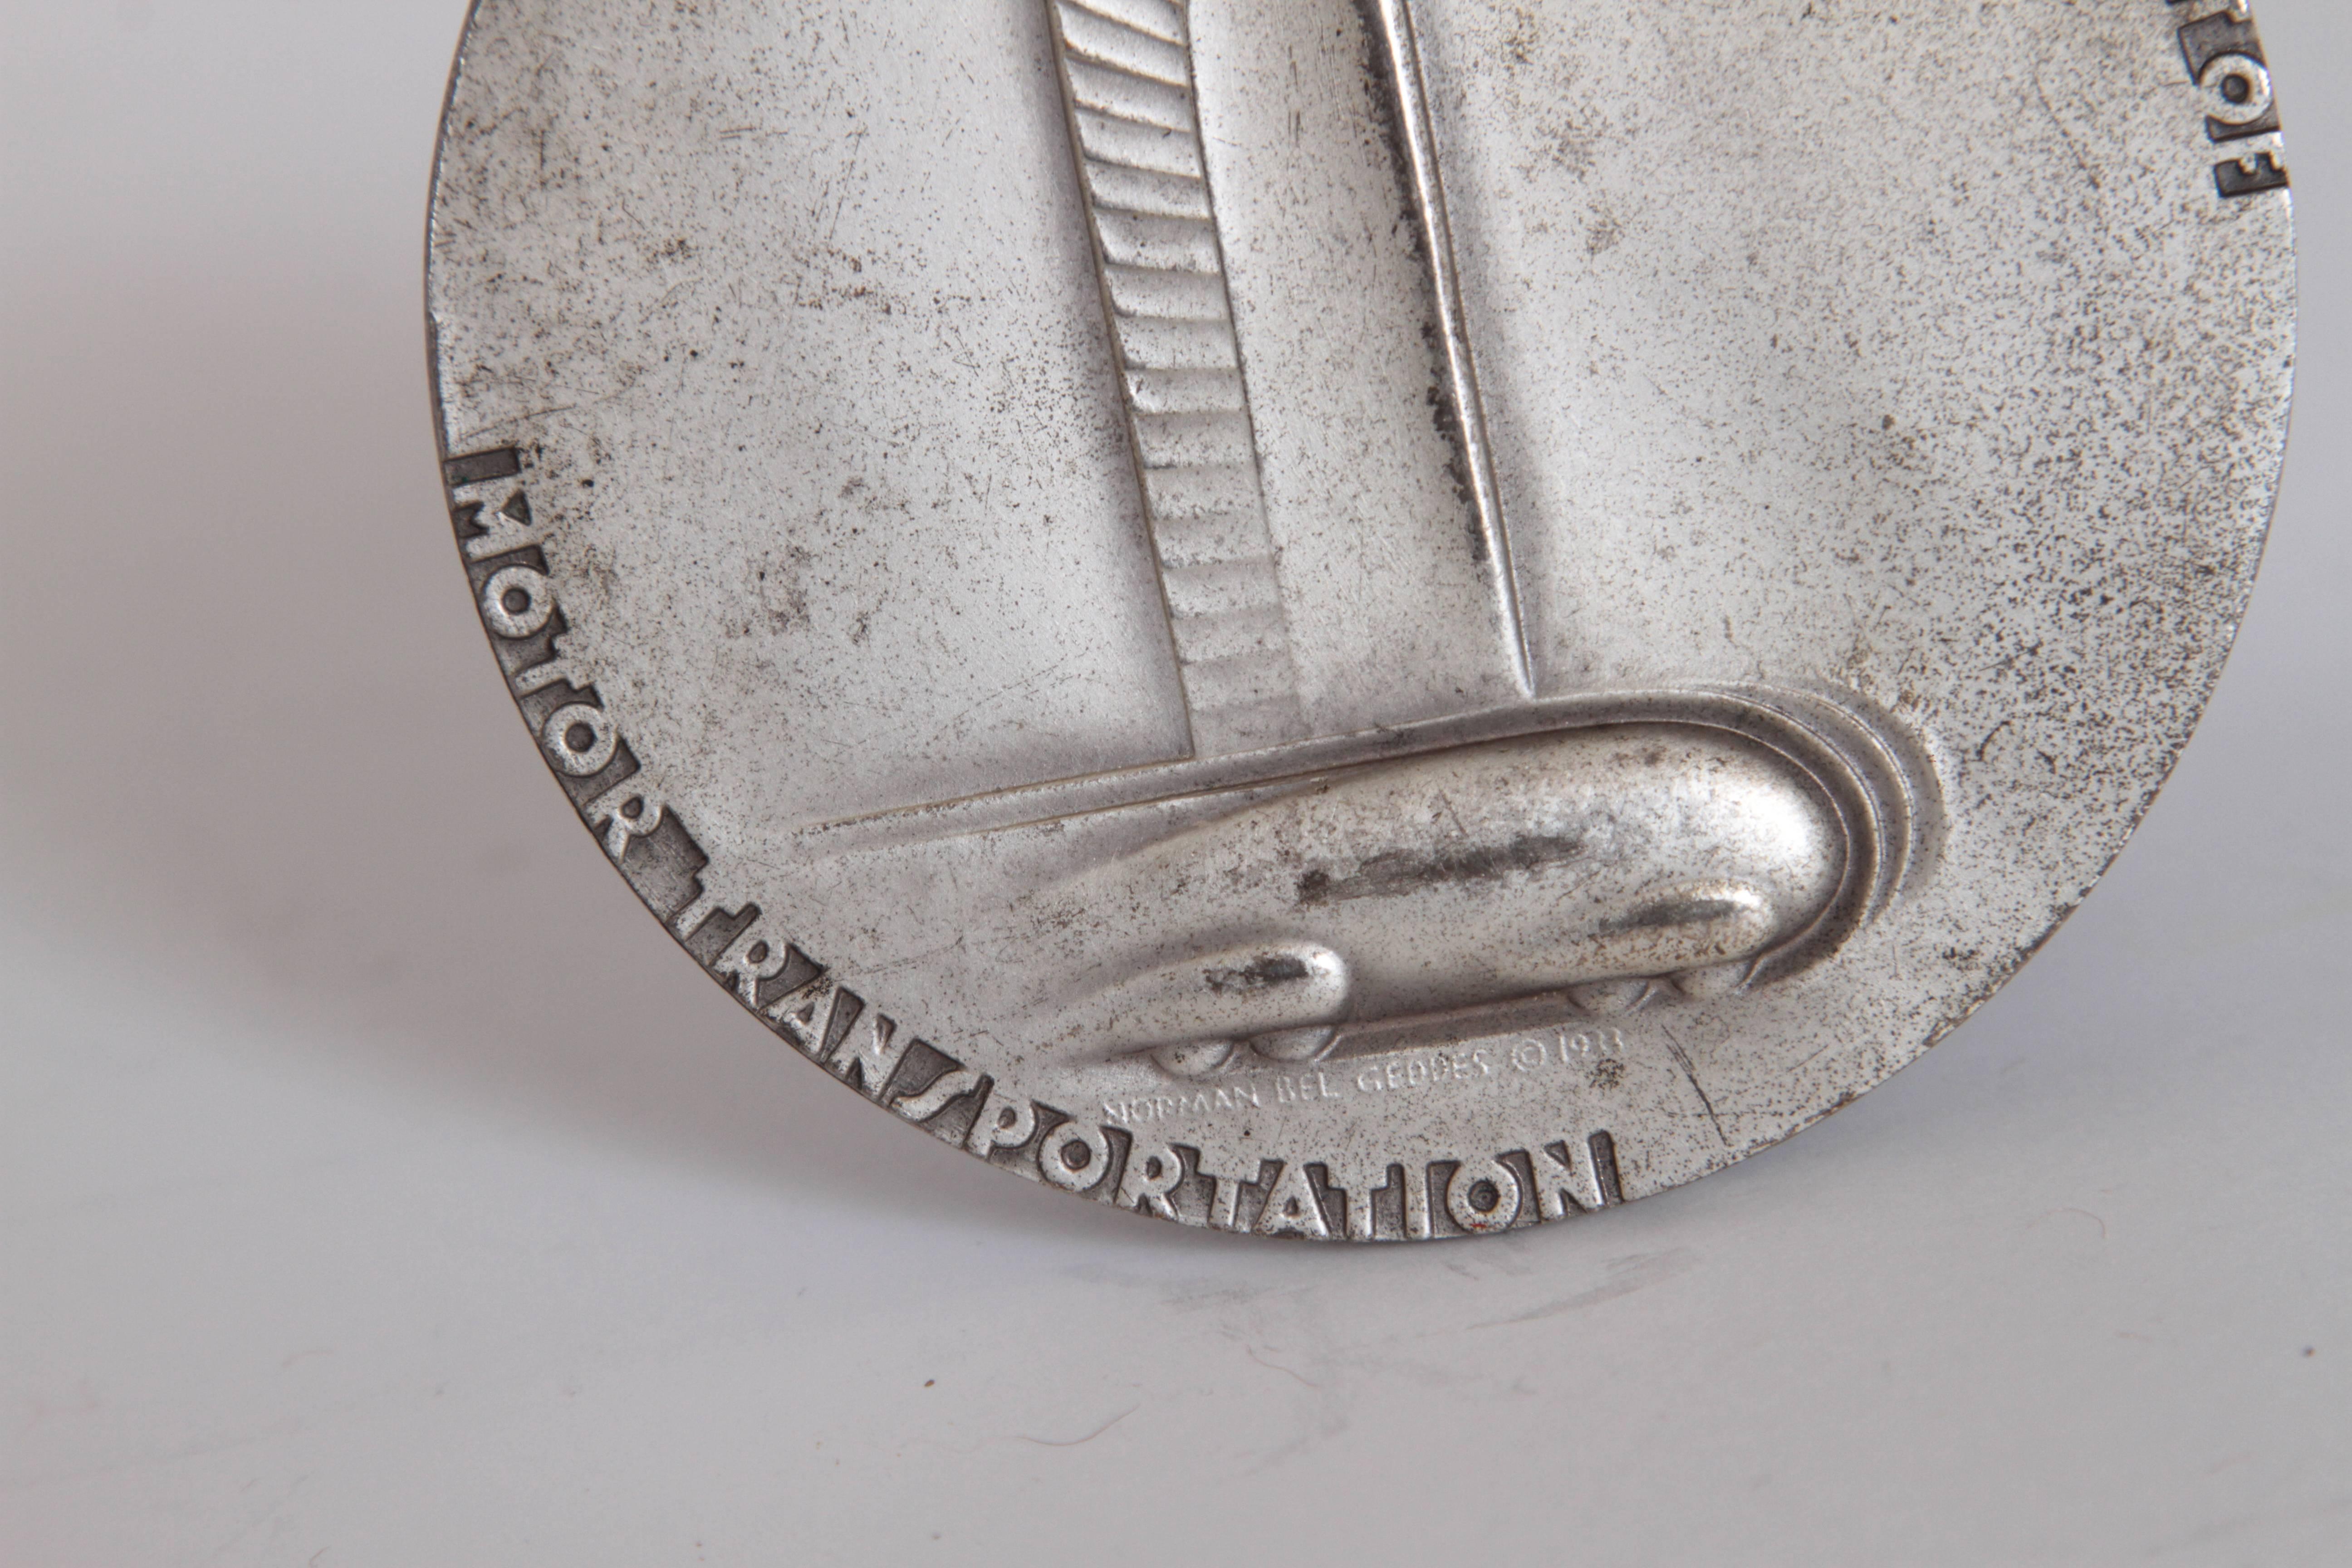 Machine Age Art Deco Norman Bel Geddes Medallion, General Motors Anniversary

Norman Bel Geddes General Motors 25th Anniversary, 1933 design. 
Iconic Bel Geddes design, executed by Rene Chambellan for the Medallic Art Company of New York.

3